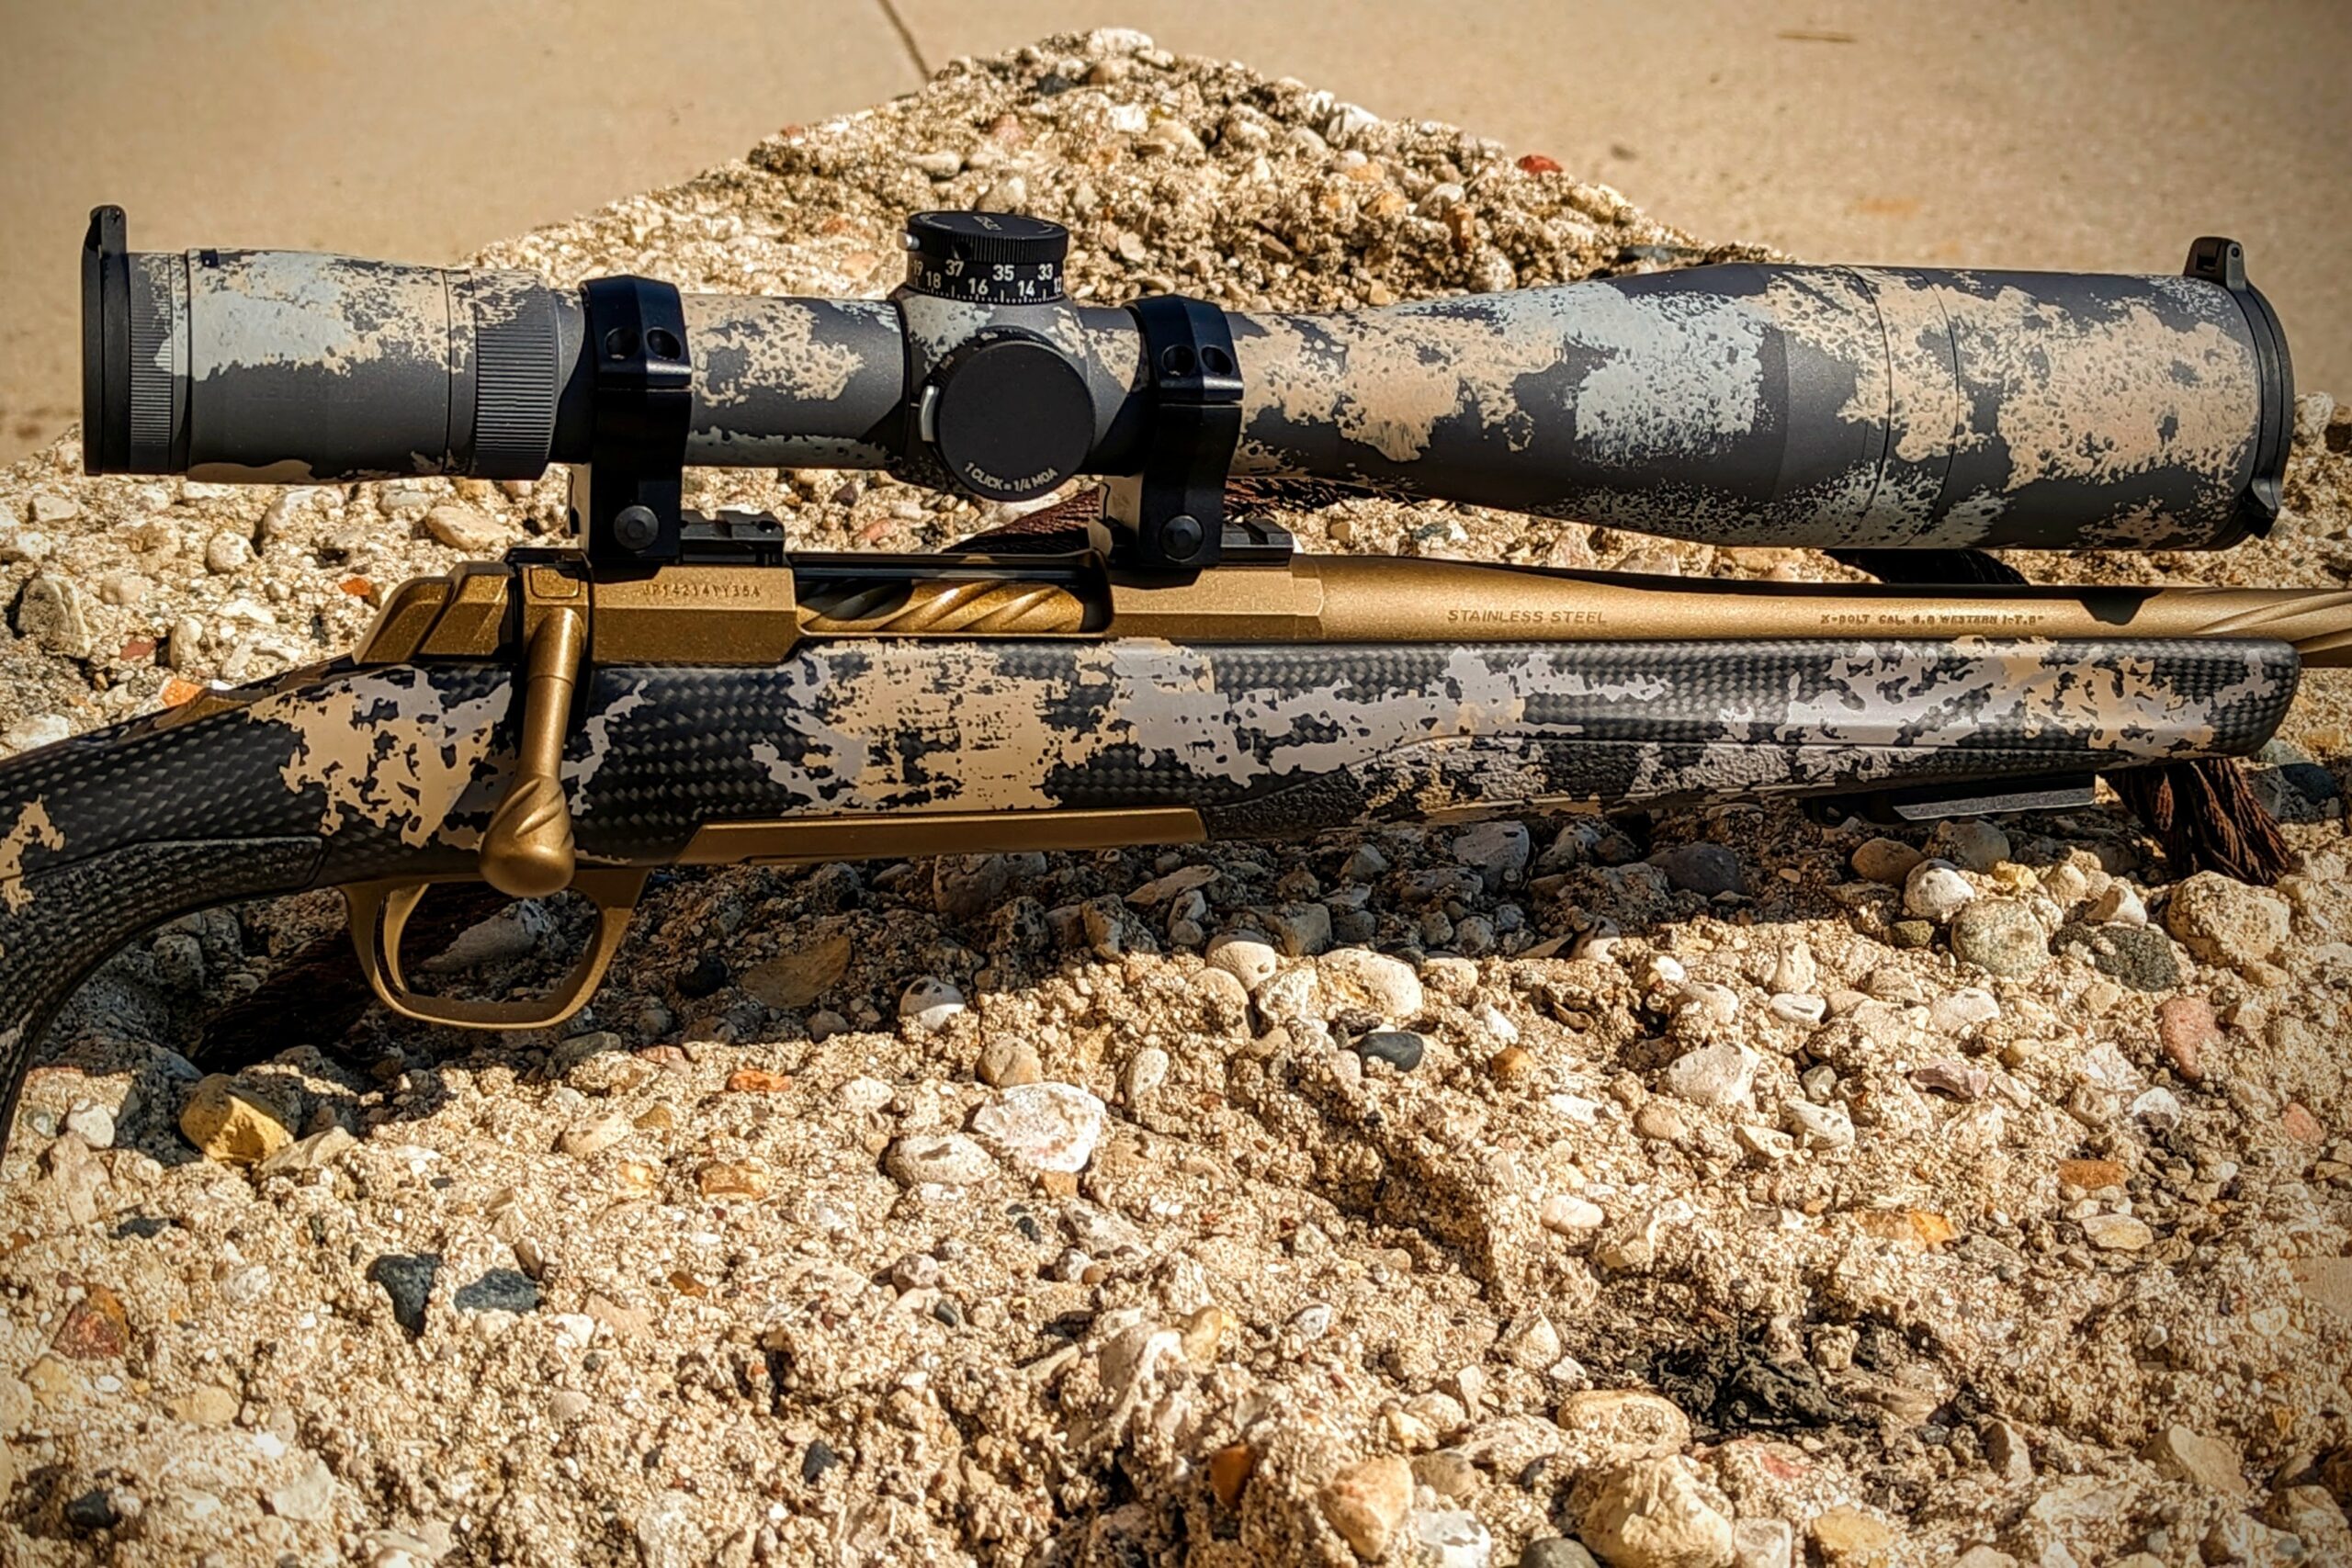 Rifle and Optic with matching paint job